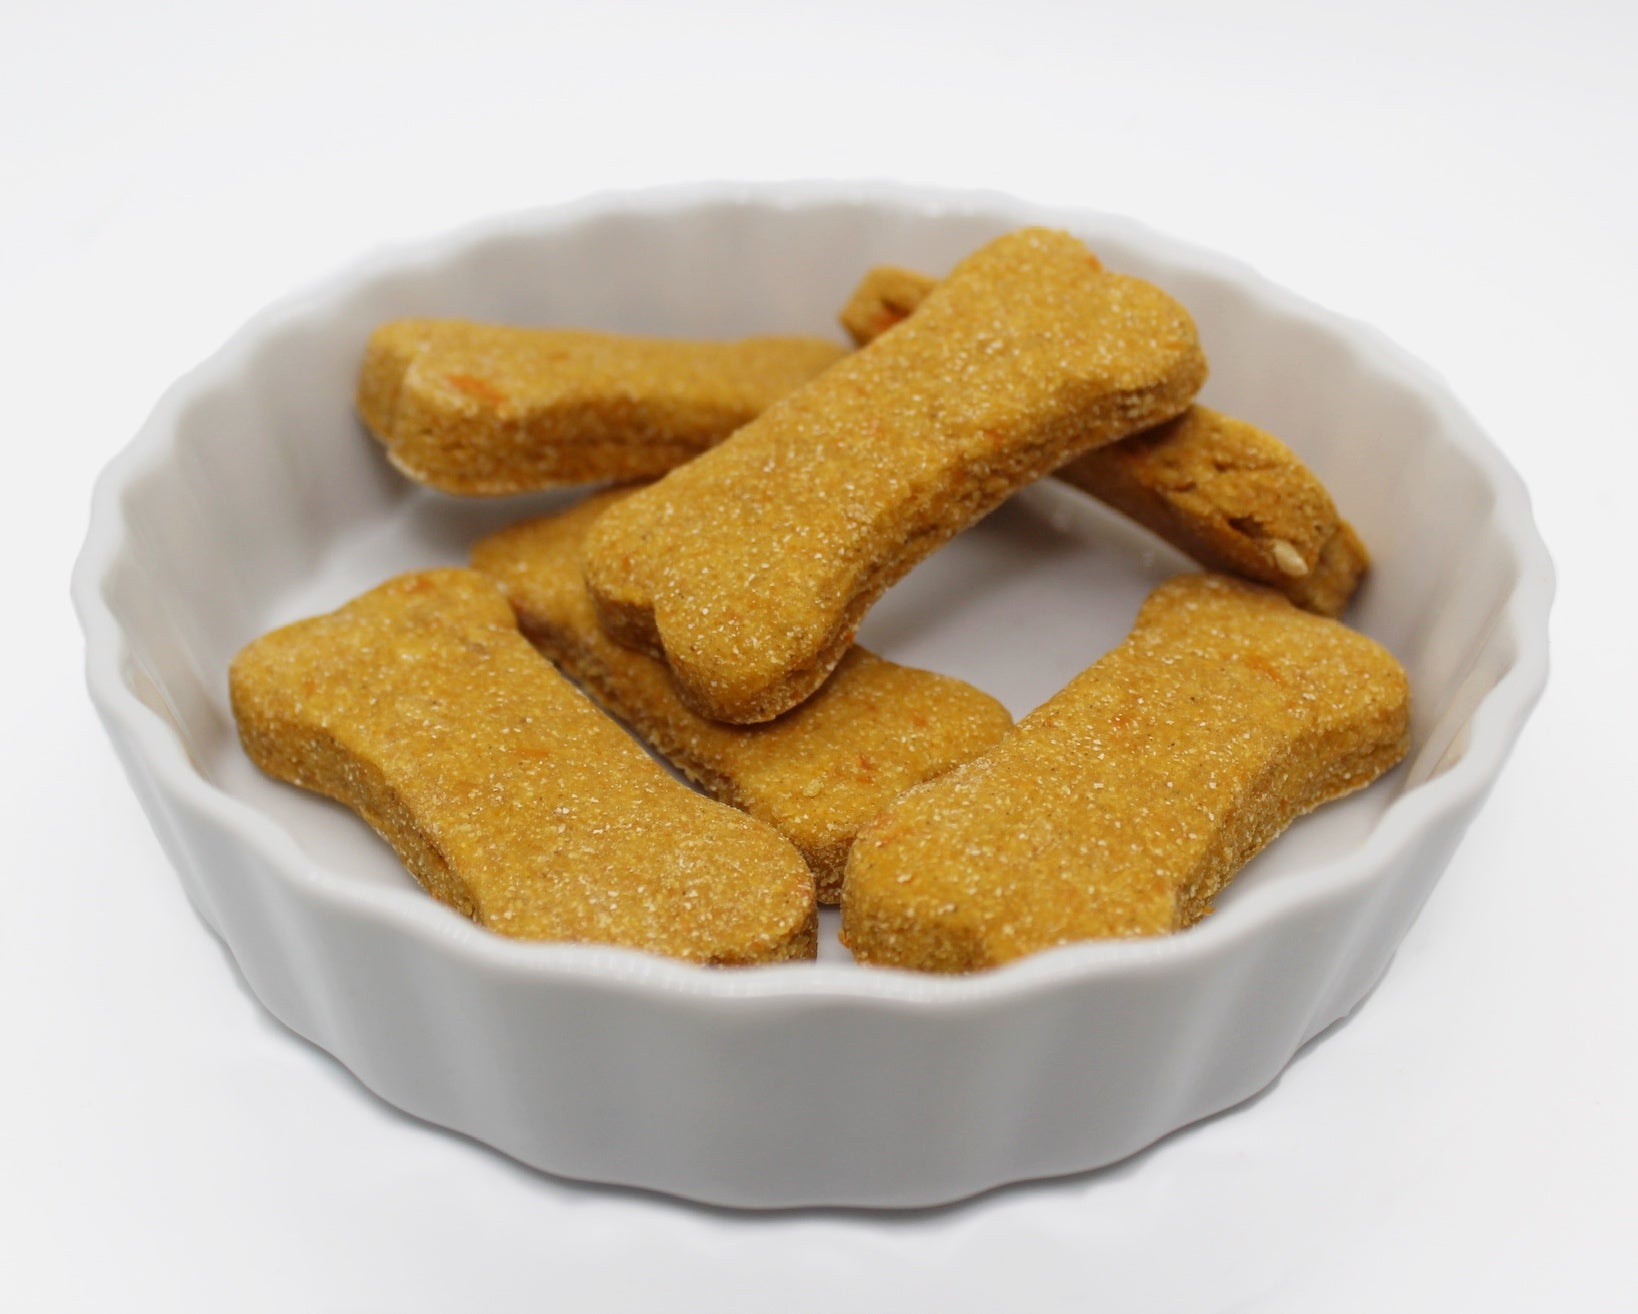 Six sweet potato and carrot flavored dog bisciuts in a small bone shape displayed in a small white dish.